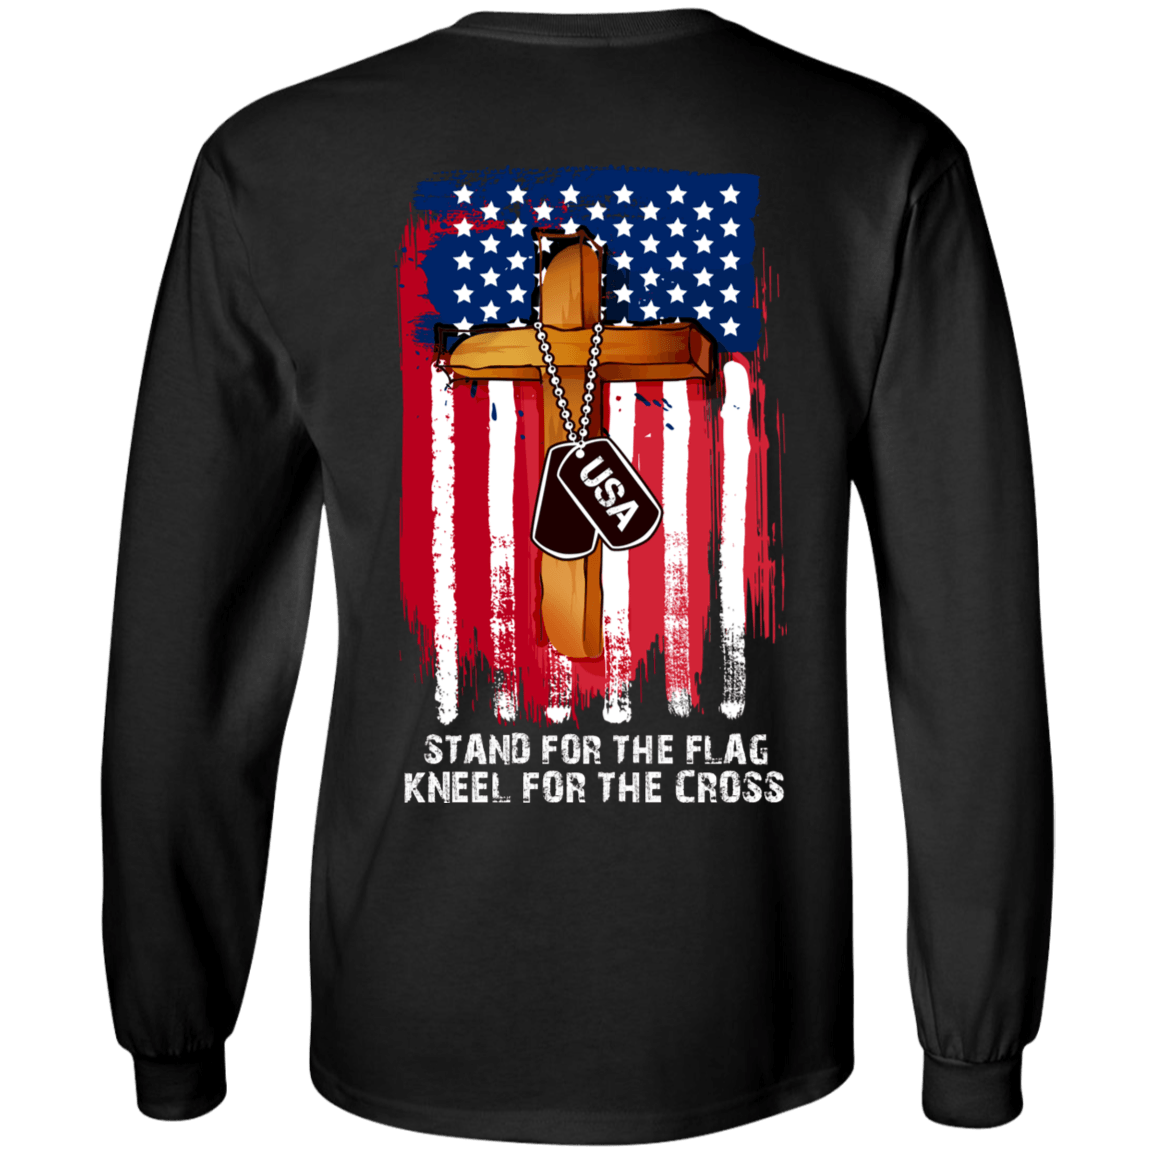 Veterans Day Long Sleeve T-Shirt - Stand For The Flag, Kneel For The Cross, Cotton, Black - American Legend Rider